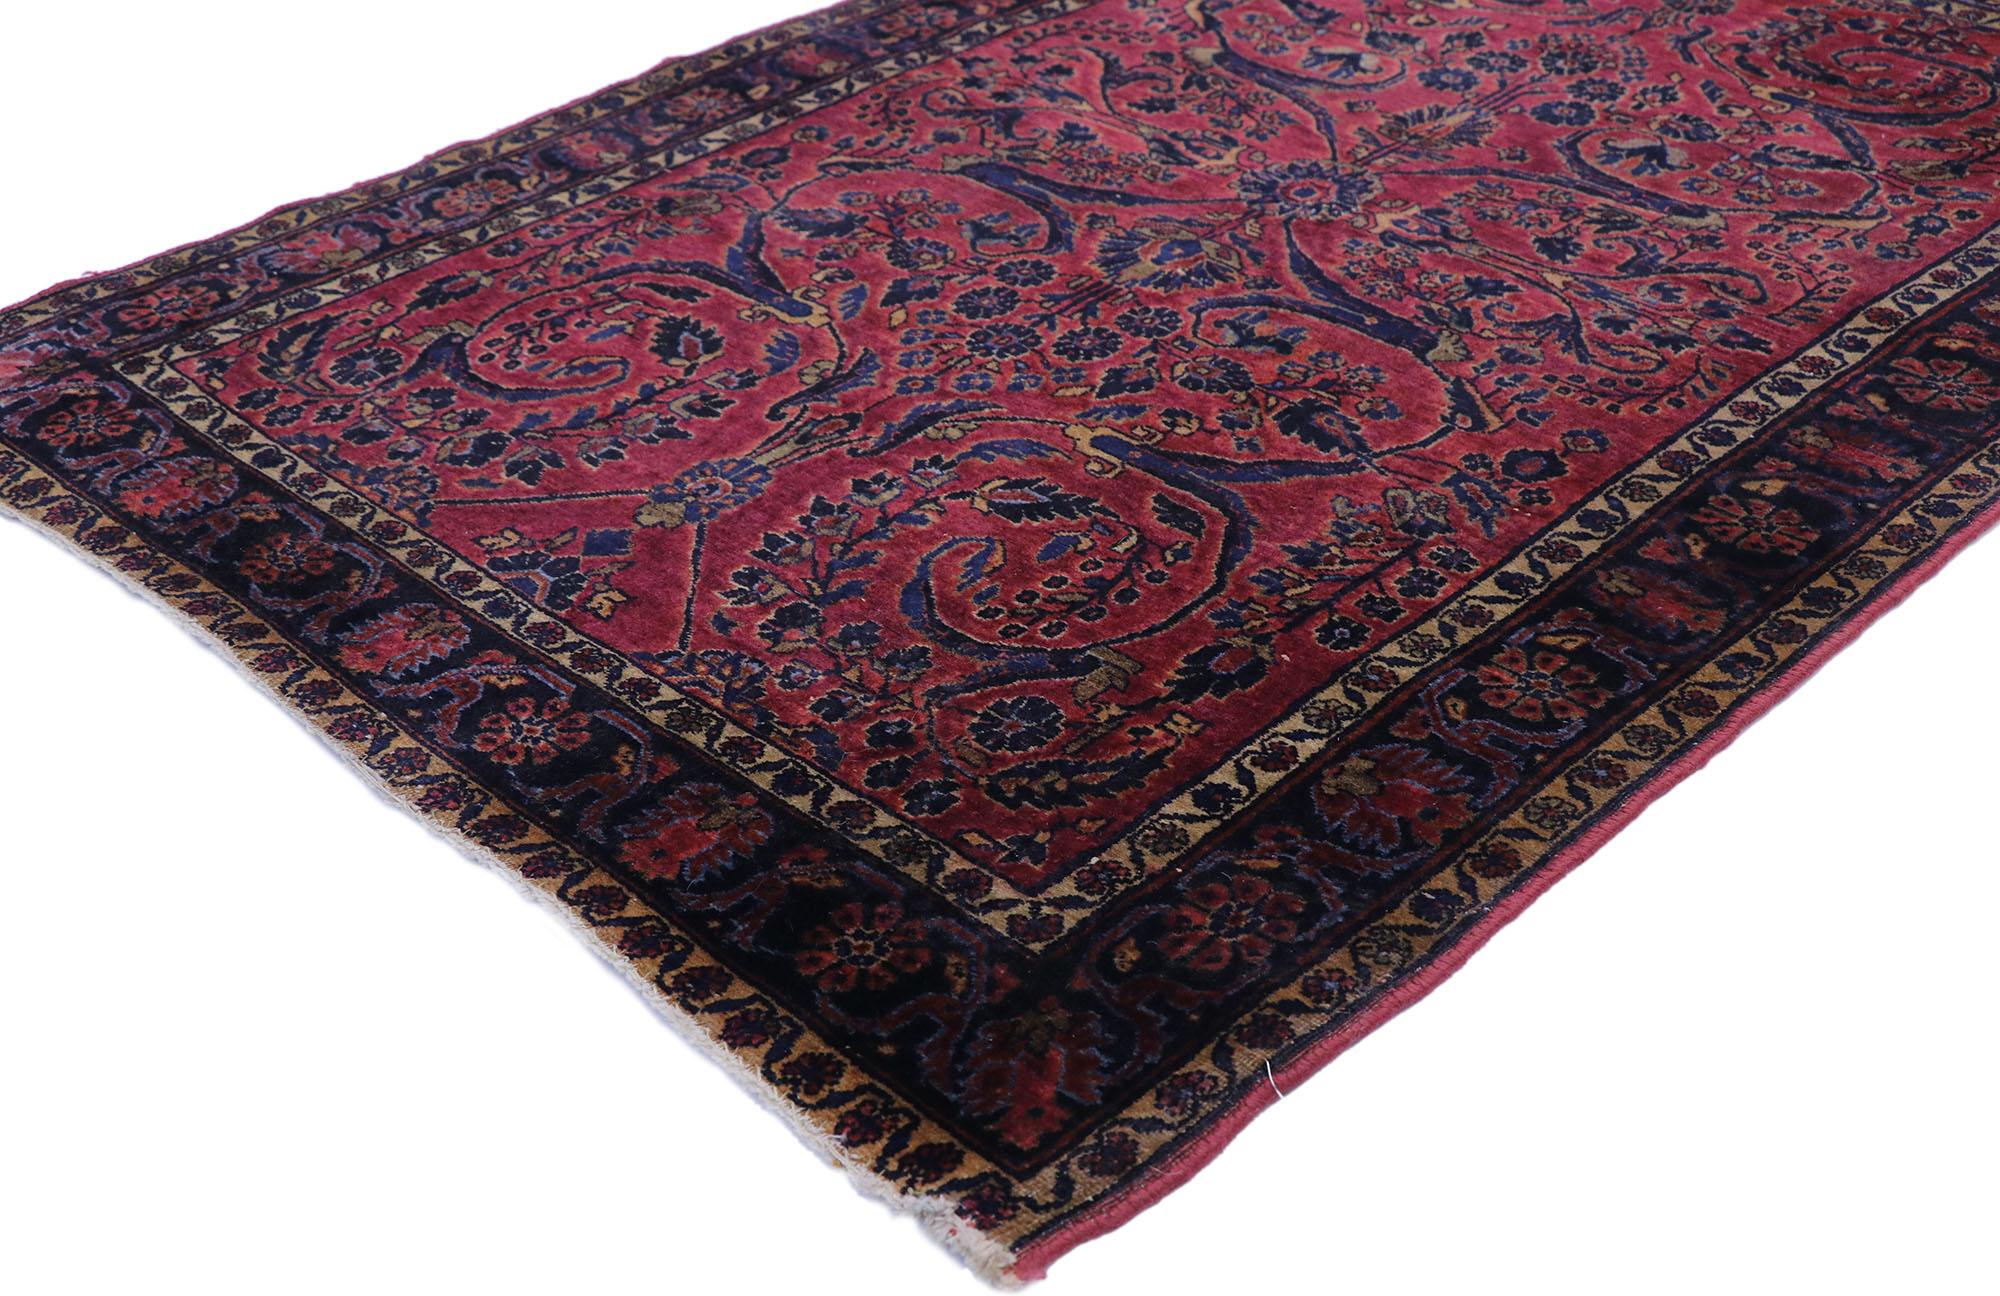 77634, antique Persian Sarouk rug with old world Victorian style 03'05 x 04'11. With its beguiling beauty and rich jewel-tones, this hand-knotted wool antique Persian Sarouk rug is poised to impress. The abrashed burgundy field features an all-over